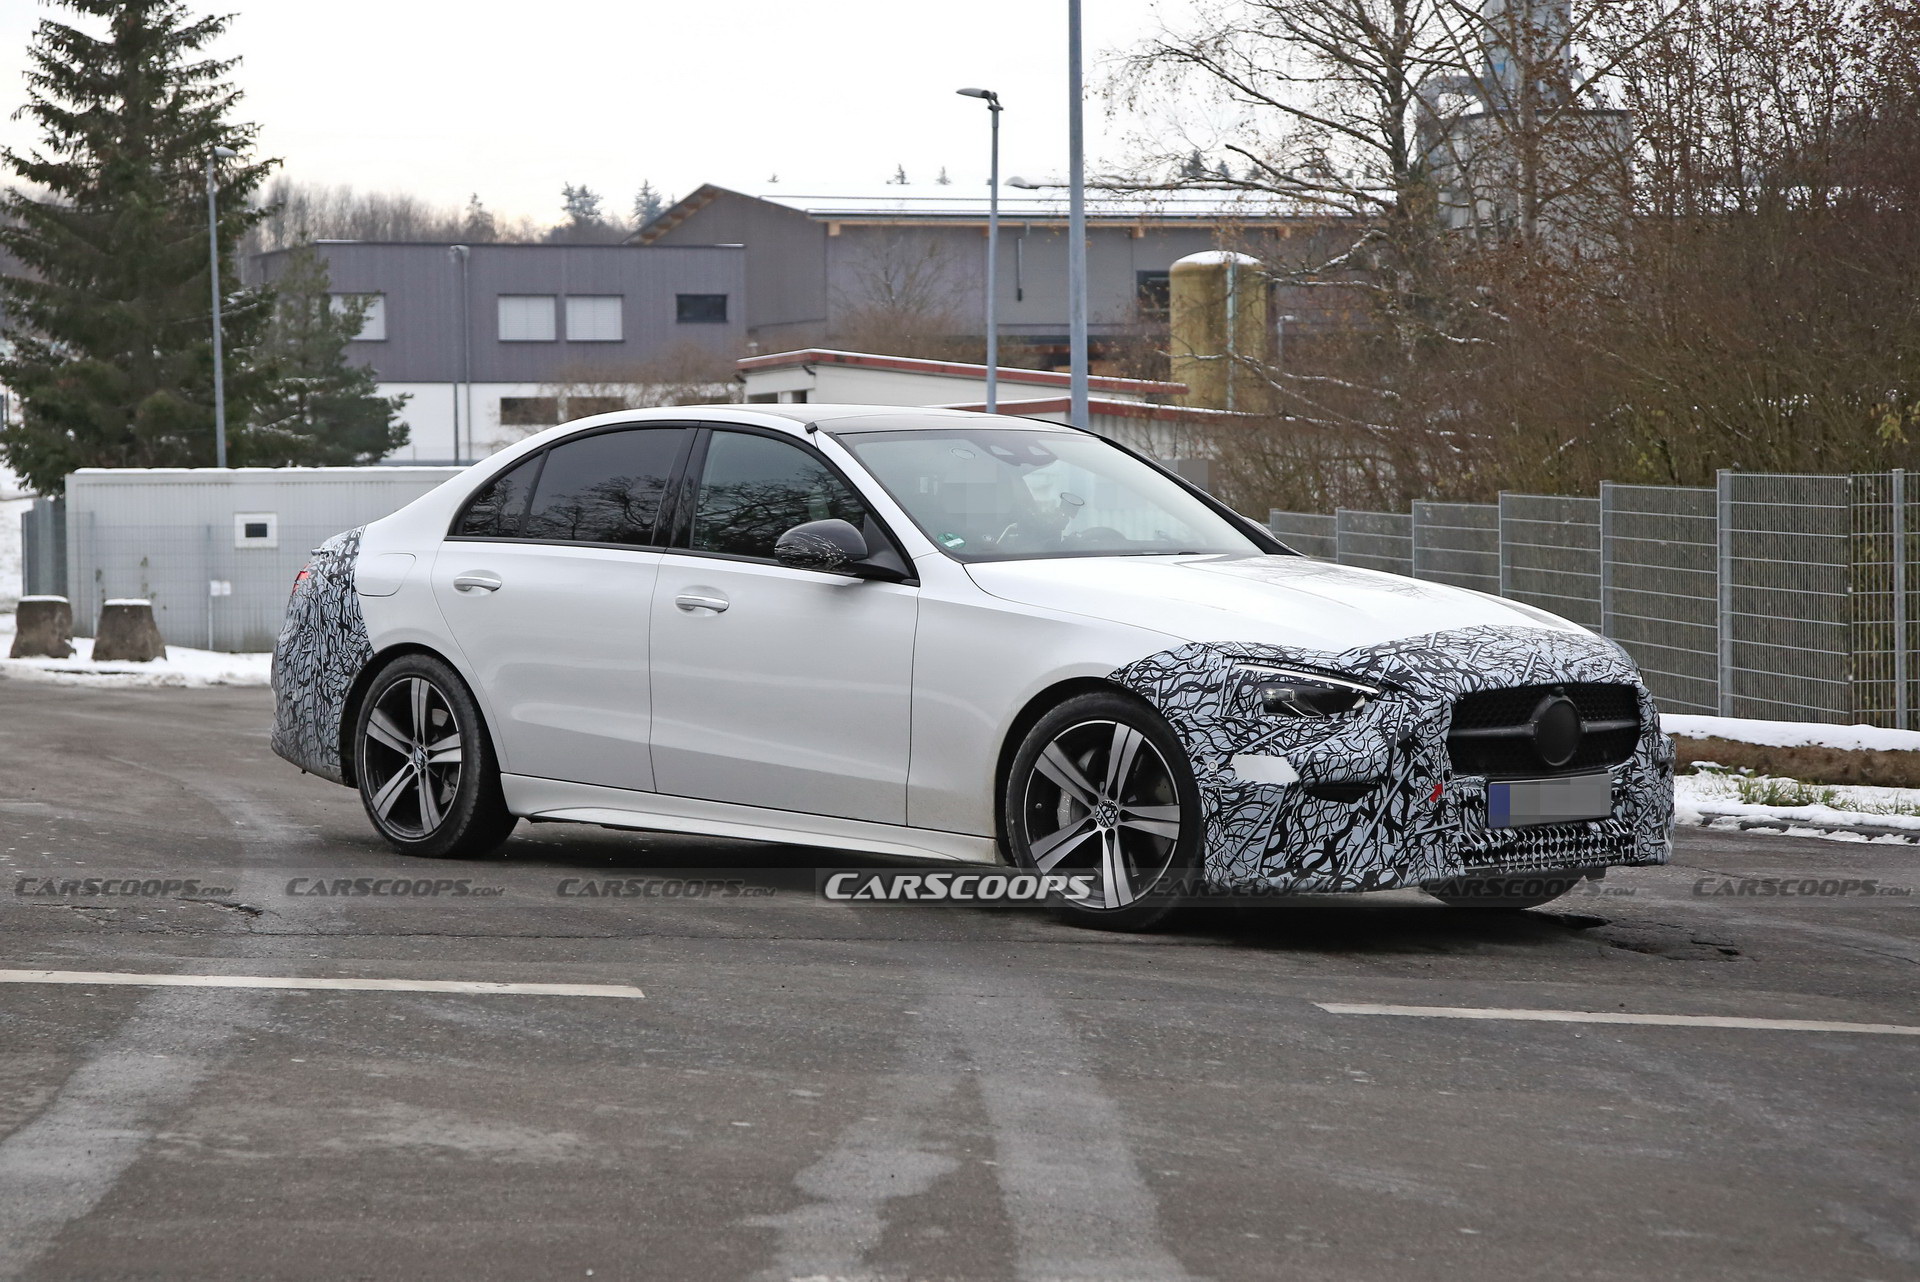 22 Mercedes Benz C Class Sedan Gives Off Miniature S Class Vibes In Latest Spy Photos Carscoops